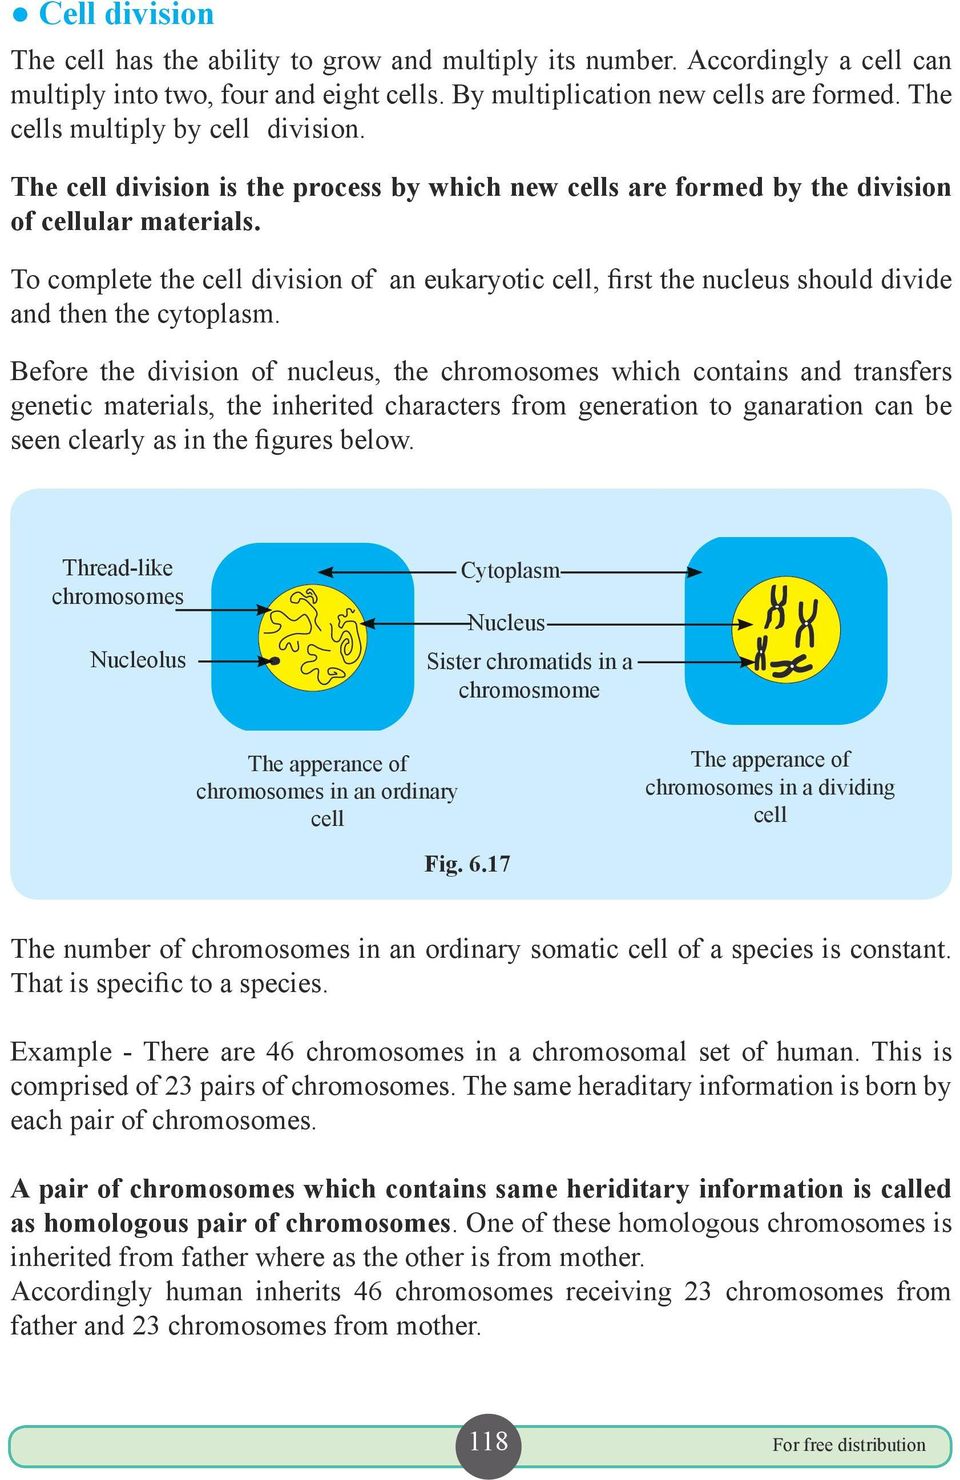 To complete the cell division of an eukaryotic cell, first the nucleus should divide and then the cytoplasm.